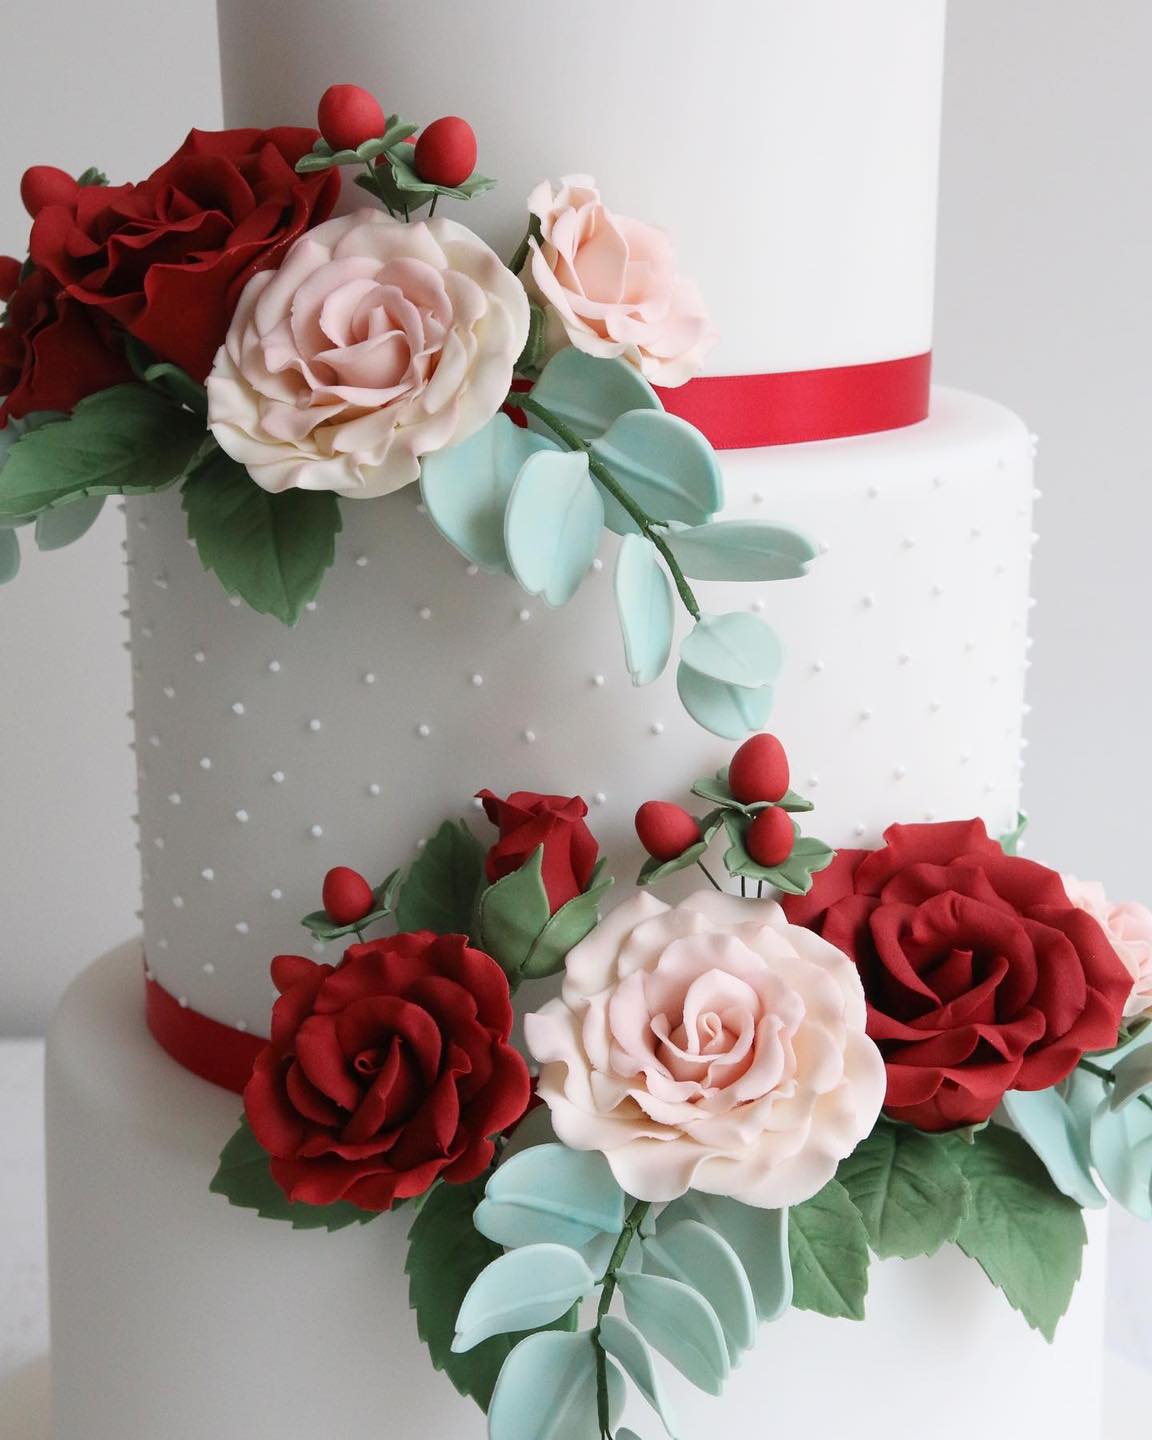 White Wedding Cake with Red & Pink Roses Close Up